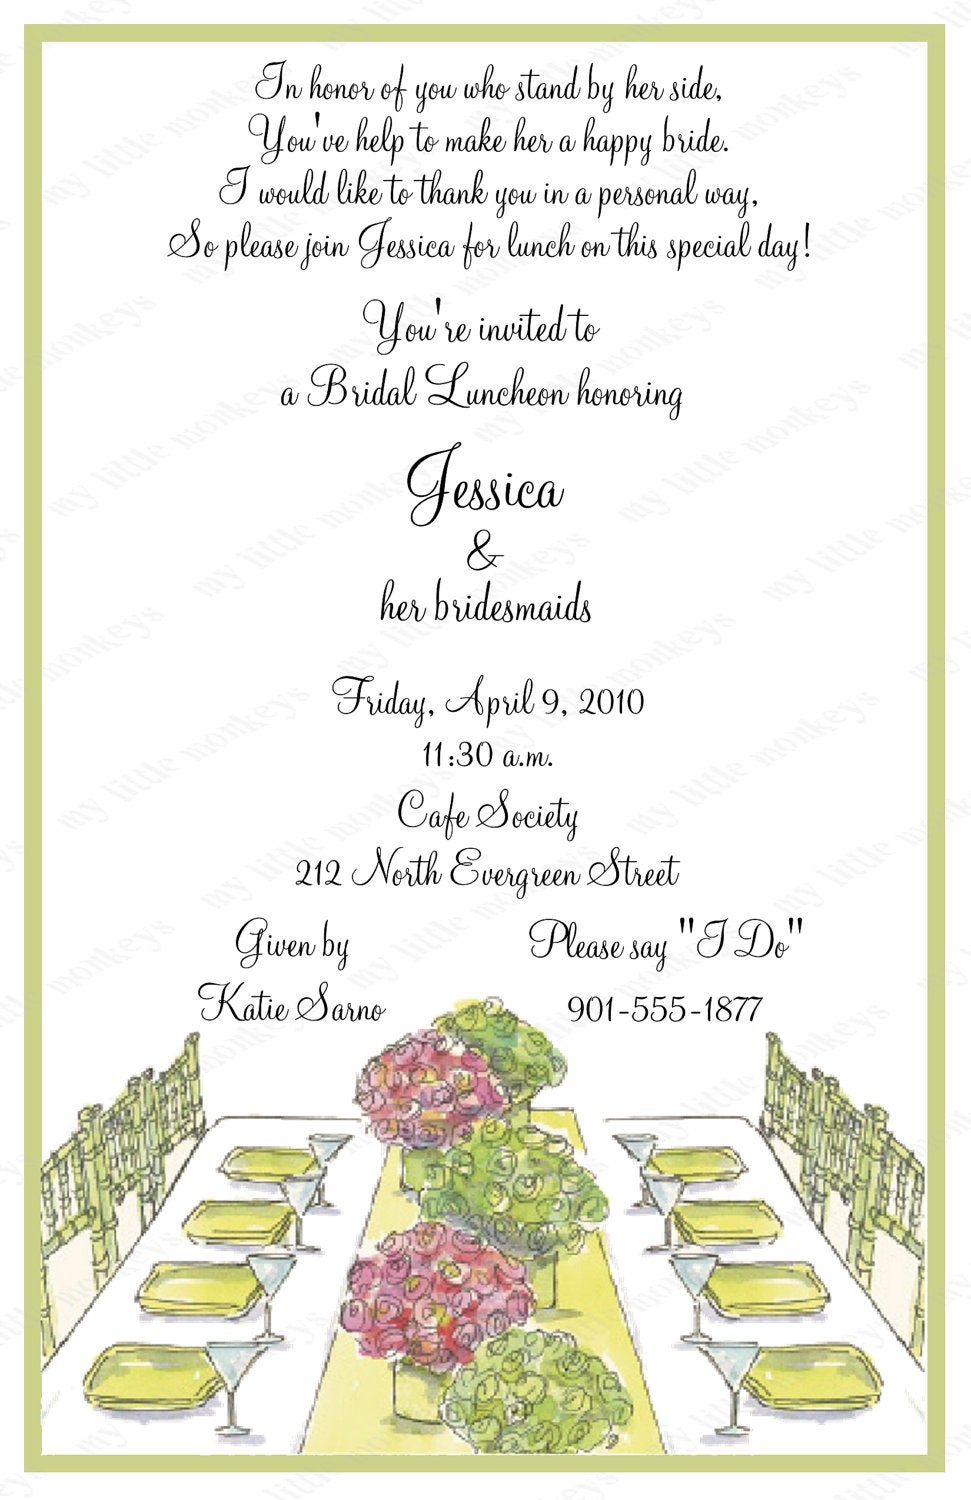 Lunch Invitations Pictures 7